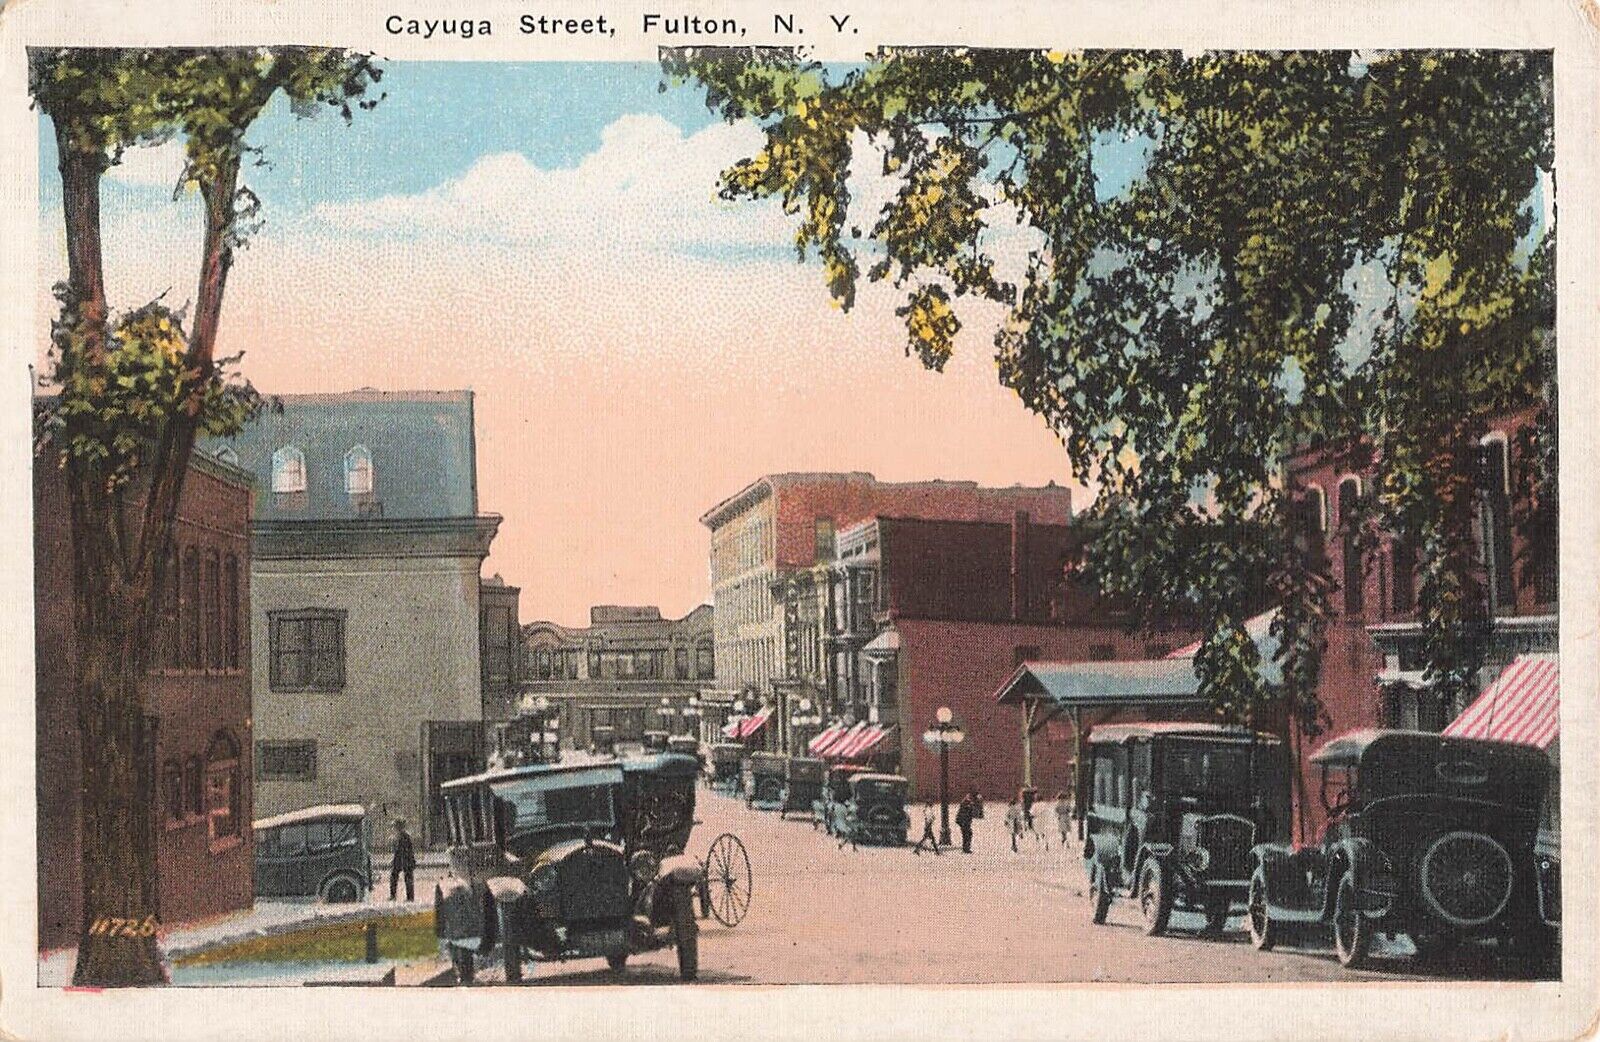 Fulton, New York  Postcard Cayuga Street Classic Cars About 1920s  D4